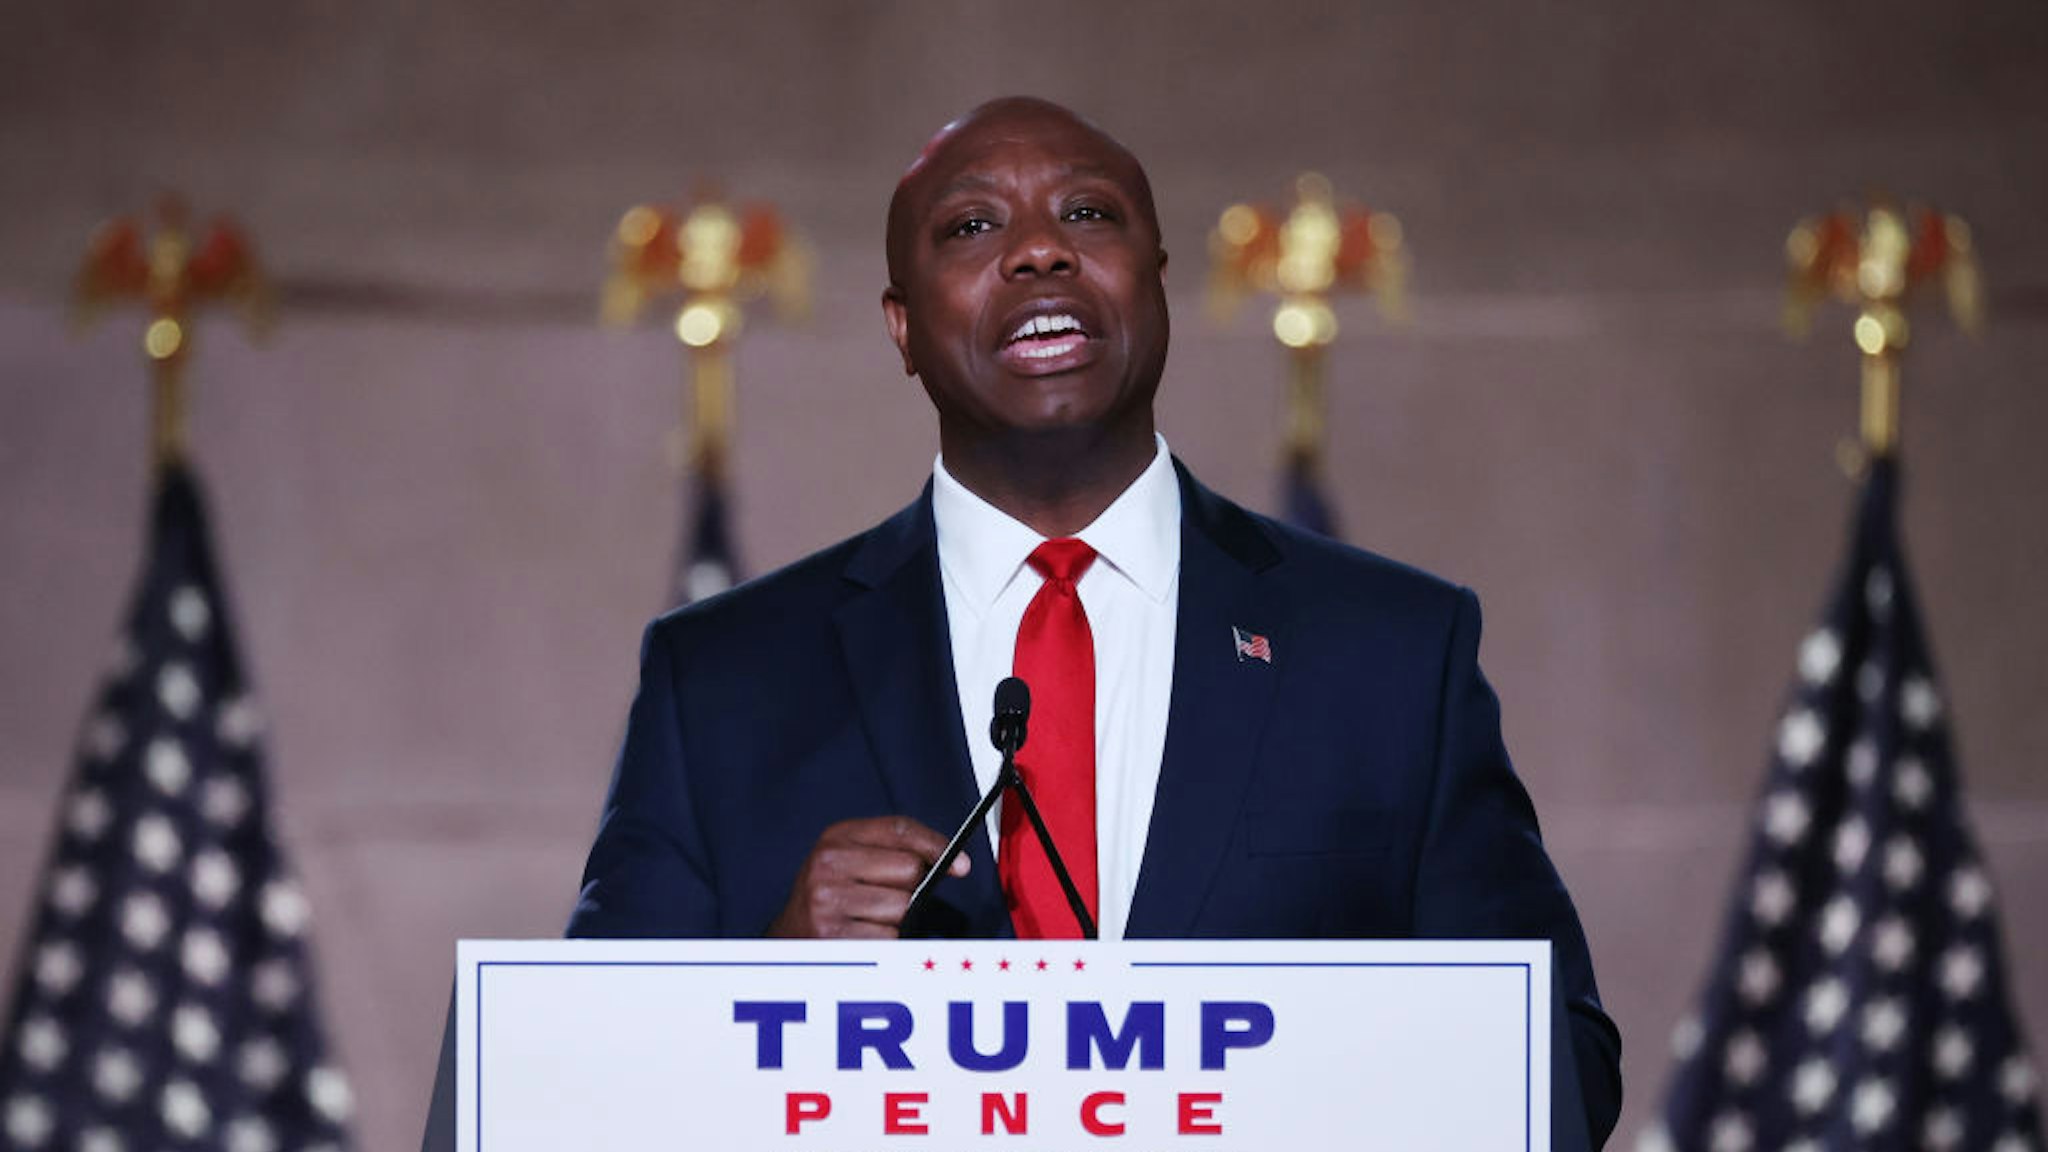 WASHINGTON, DC - AUGUST 24: U.S. Sen. Tim Scott (R-SC) stands on stage in an empty Mellon Auditorium while addressing the Republican National Convention at the Mellon Auditorium on August 24, 2020 in Washington, DC. The novel coronavirus pandemic has forced the Republican Party to move away from an in-person convention to a televised format, similar to the Democratic Party's convention a week earlier.